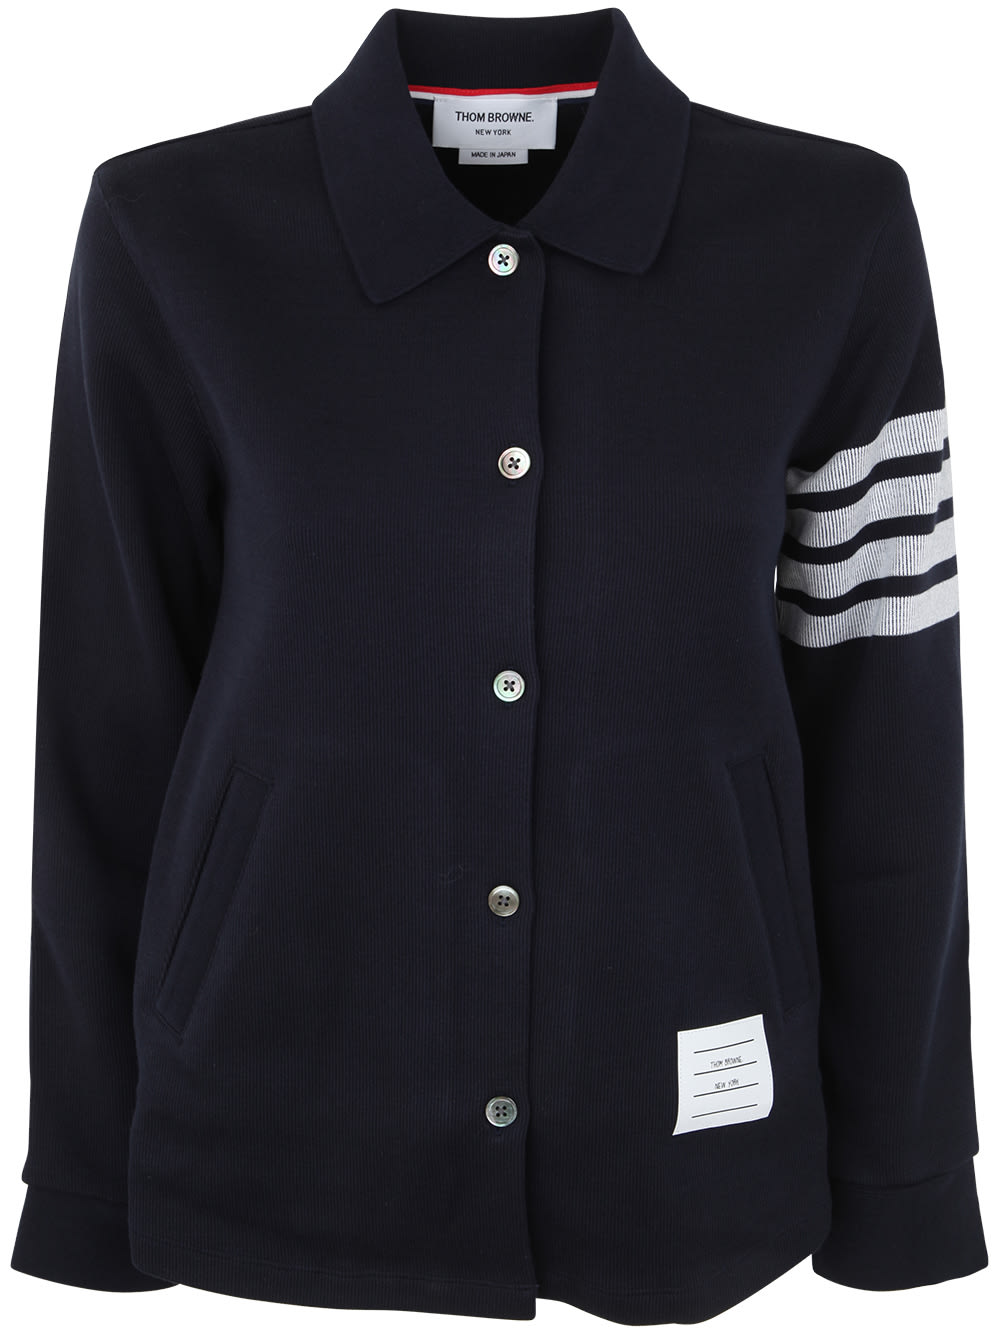 THOM BROWNE LONG SLEEVE BUTTON DOWN A-LINE SHIRT IN DOUBLE FACE KNIT WITH ENG 4BAR